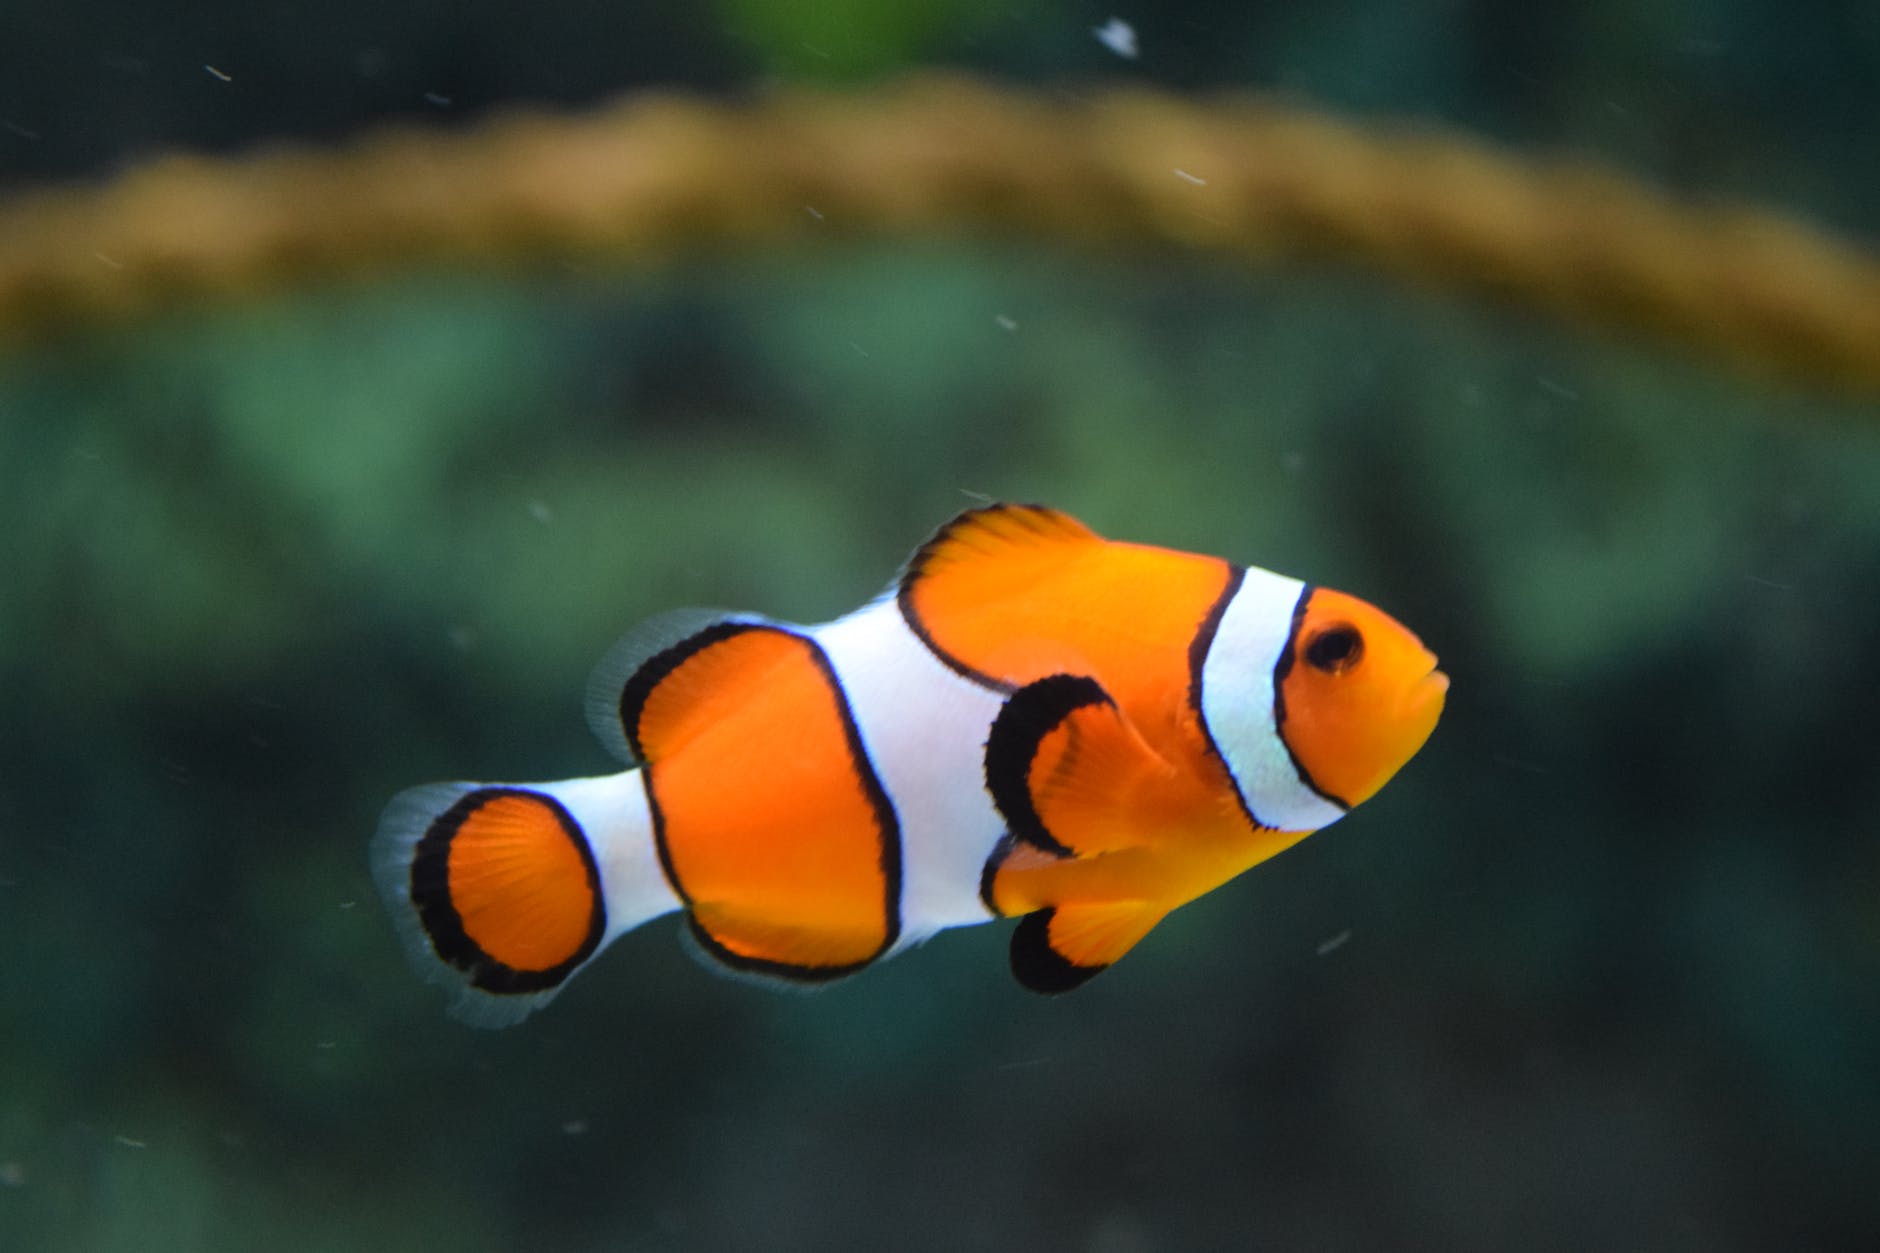 Pet fish quotes and captions